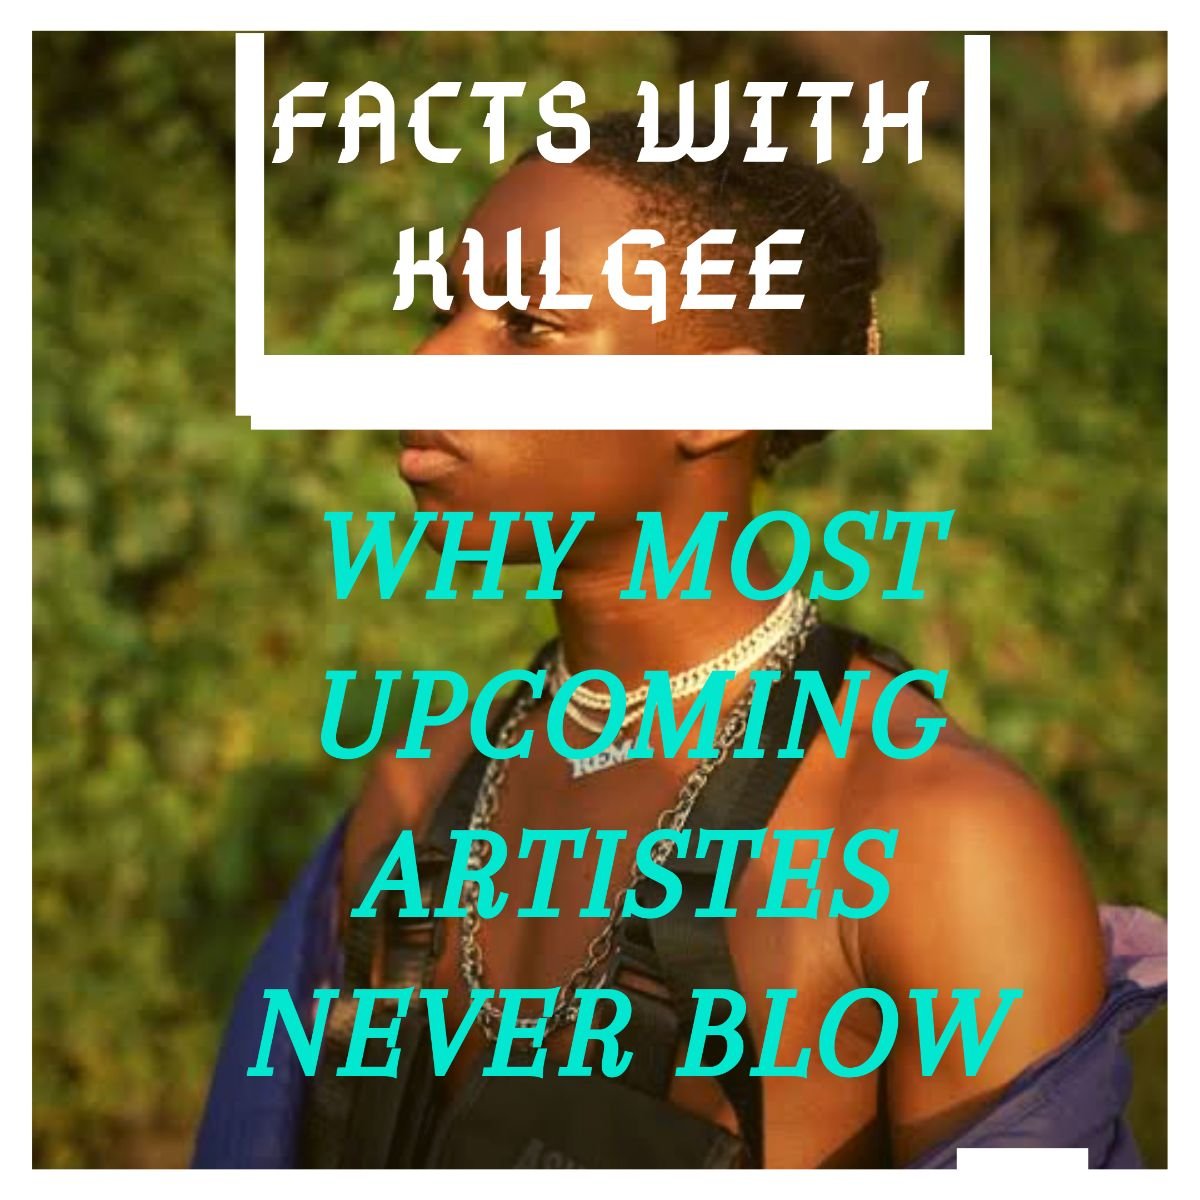 Facts With Kulgee: Why Most Upcoming Artistes never blow